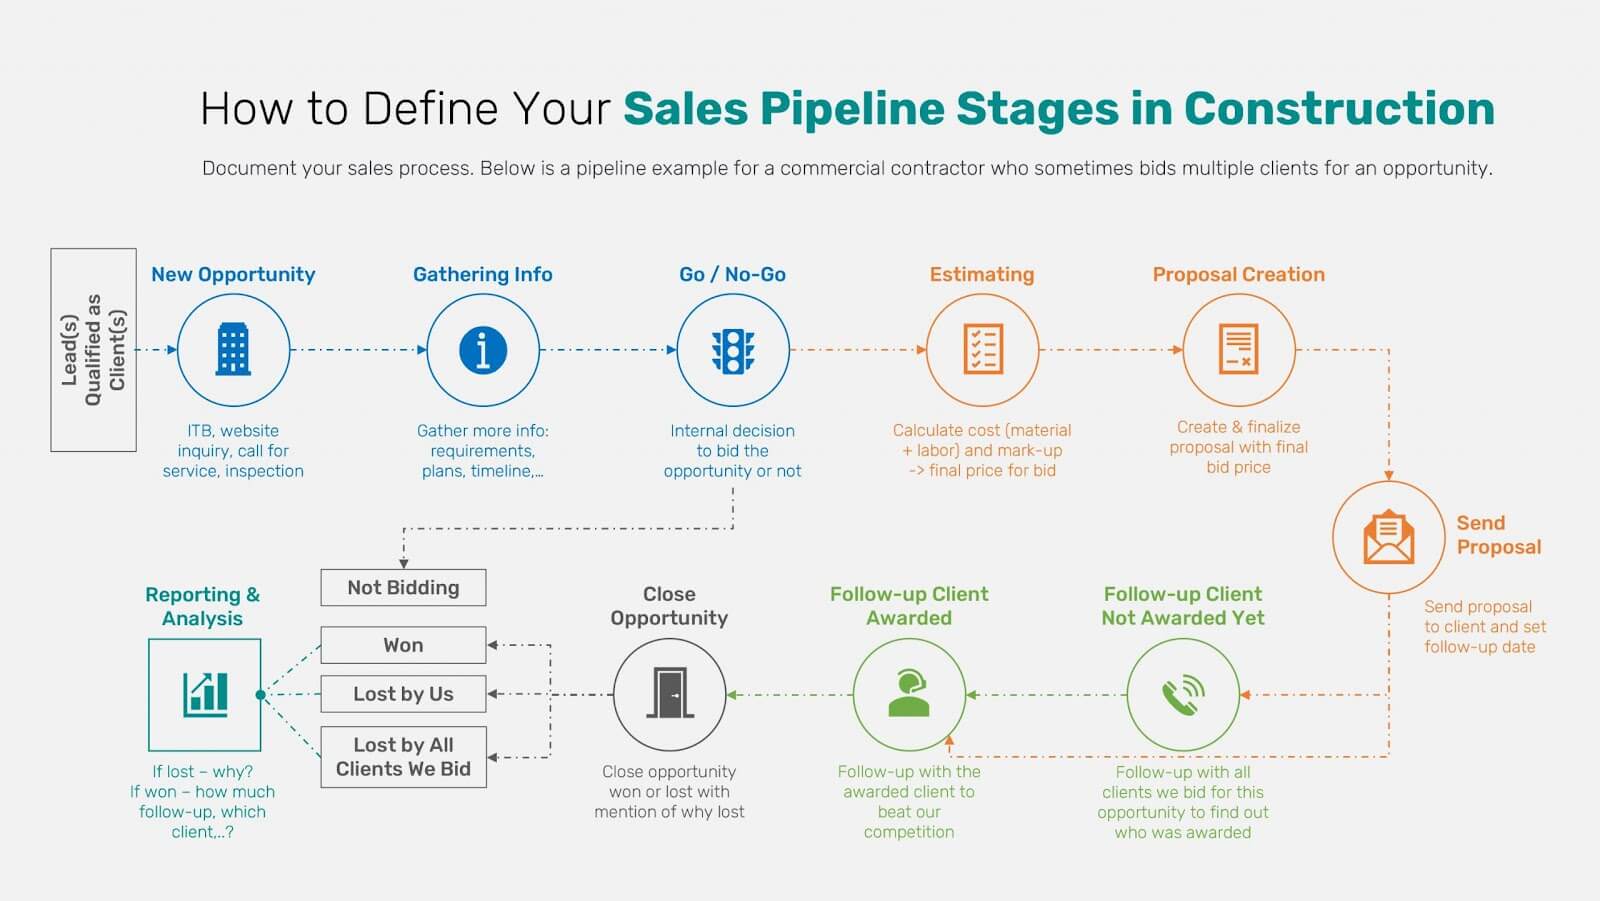 1. Understand the importance of managing your sales pipeline